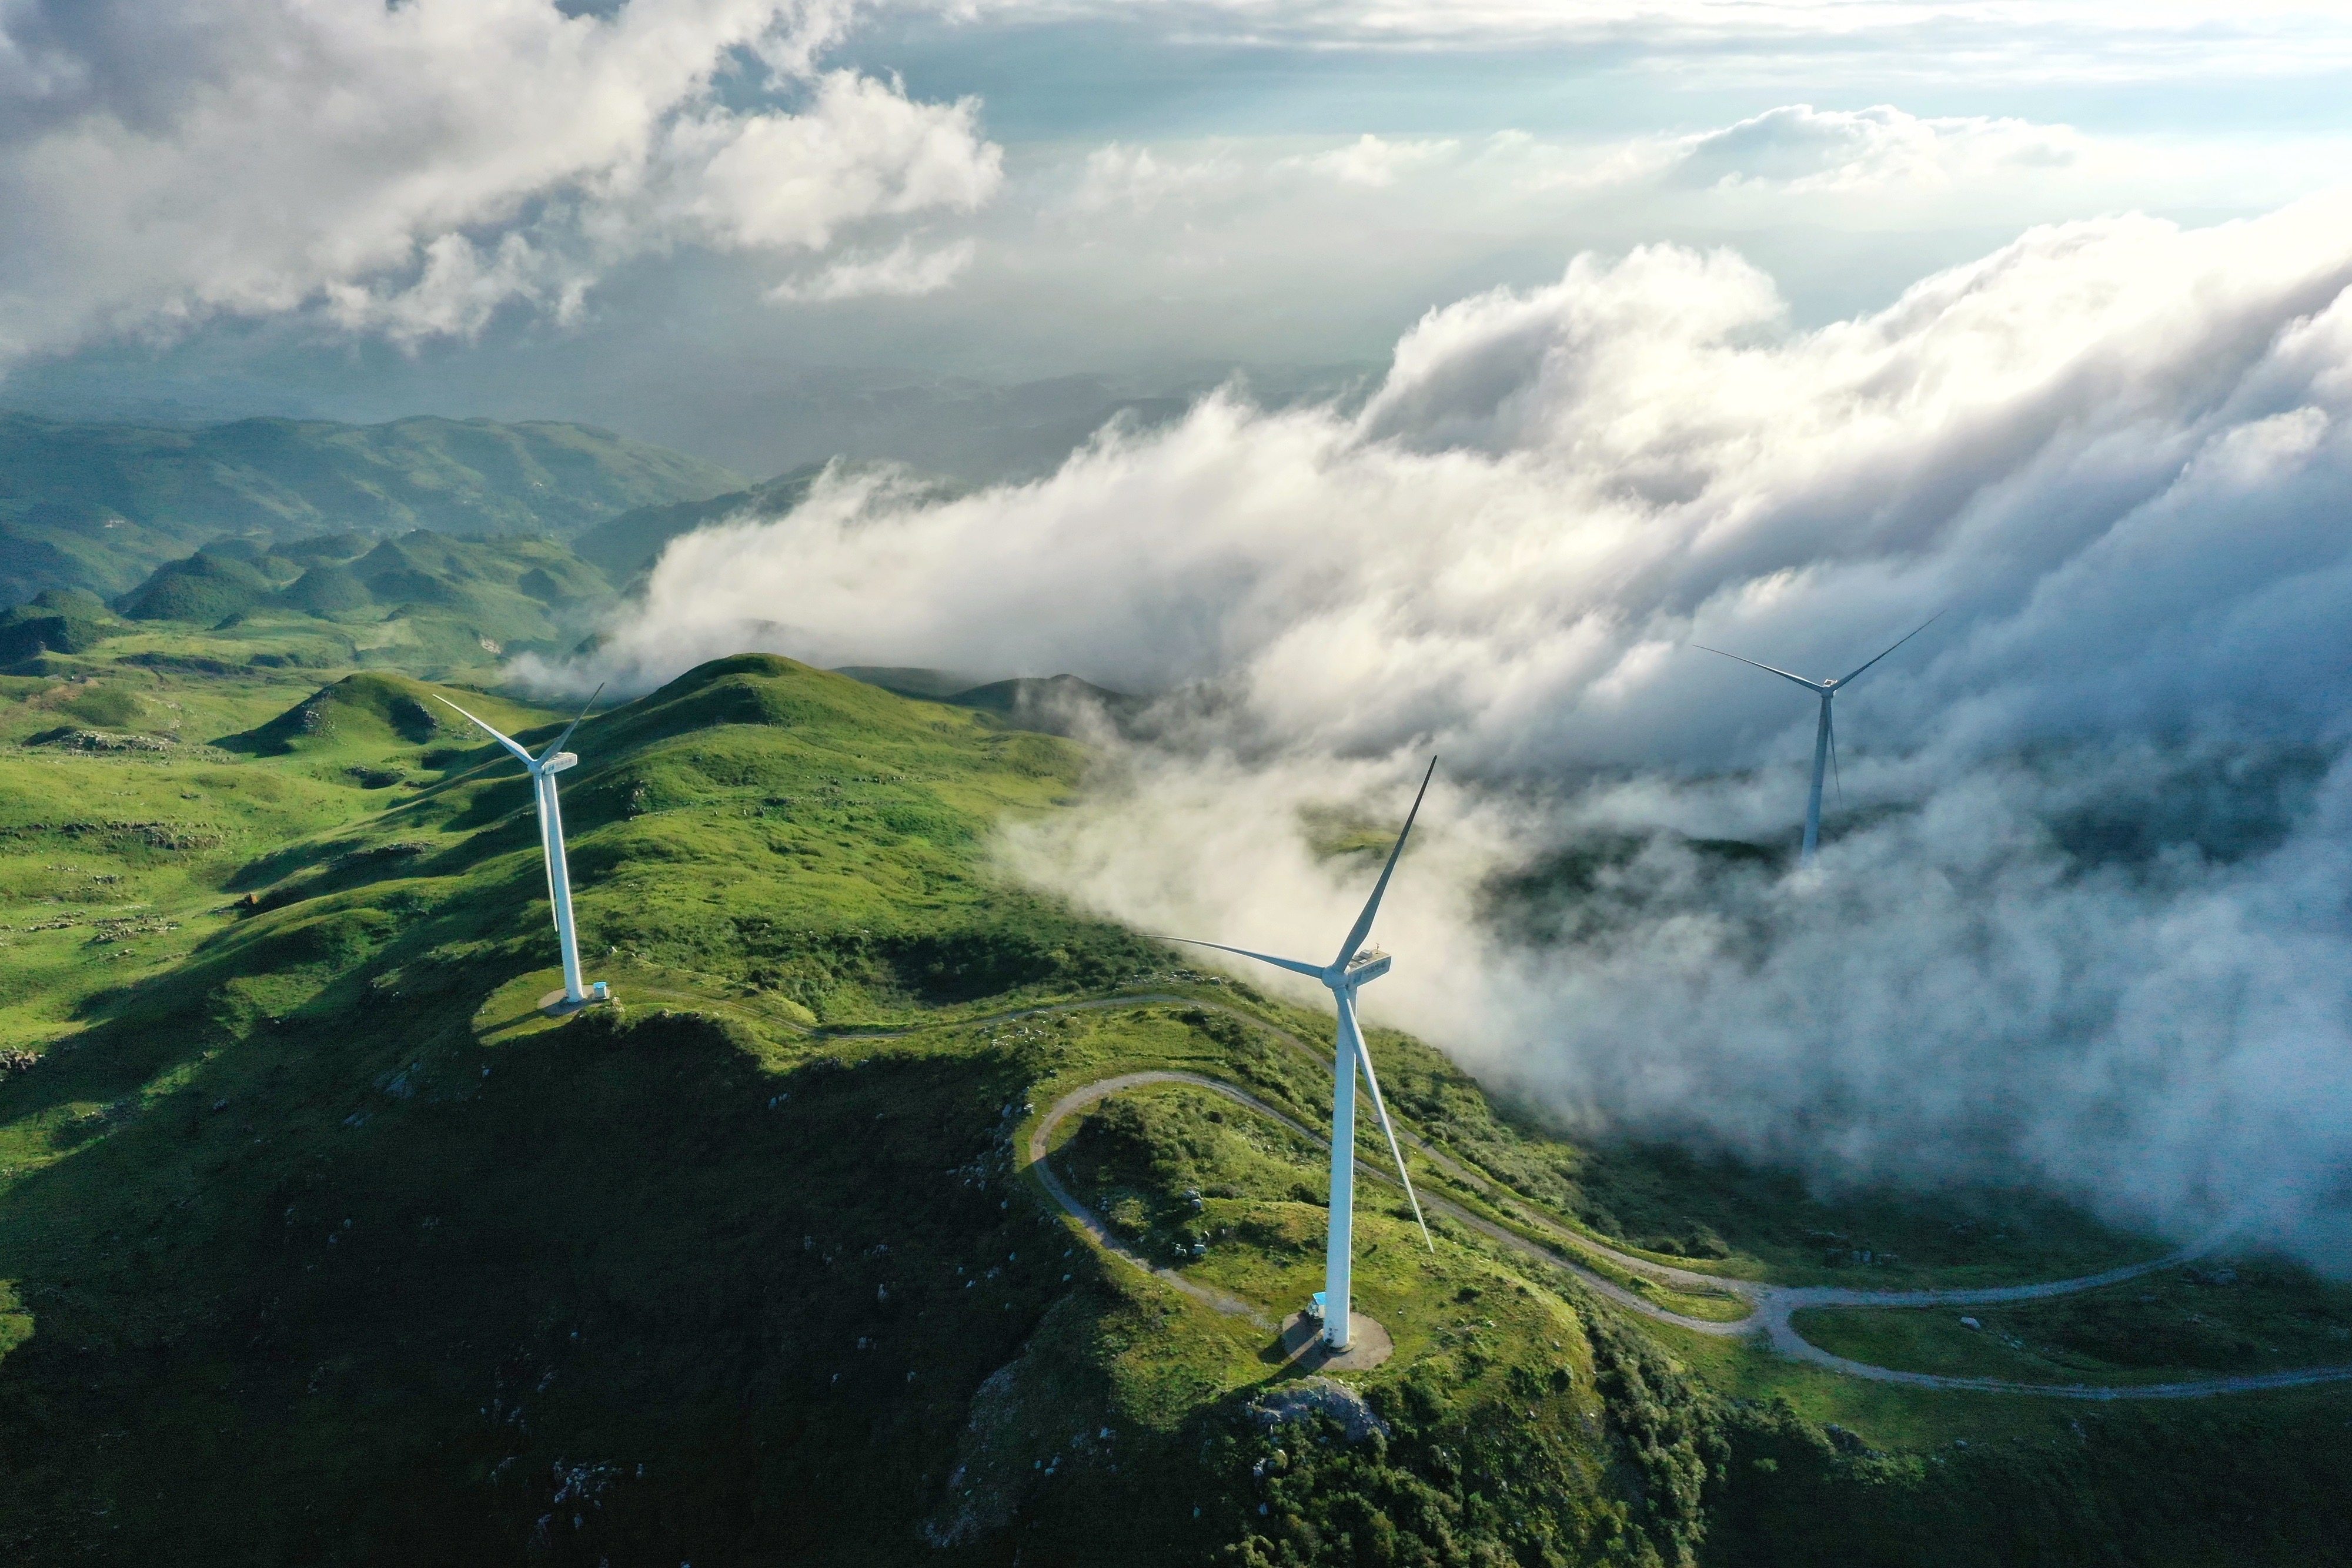 Wind turbines operate in Hezhang County, in southwest China’s Guizhou Province on August 19, 2020. Photo: Xinhua